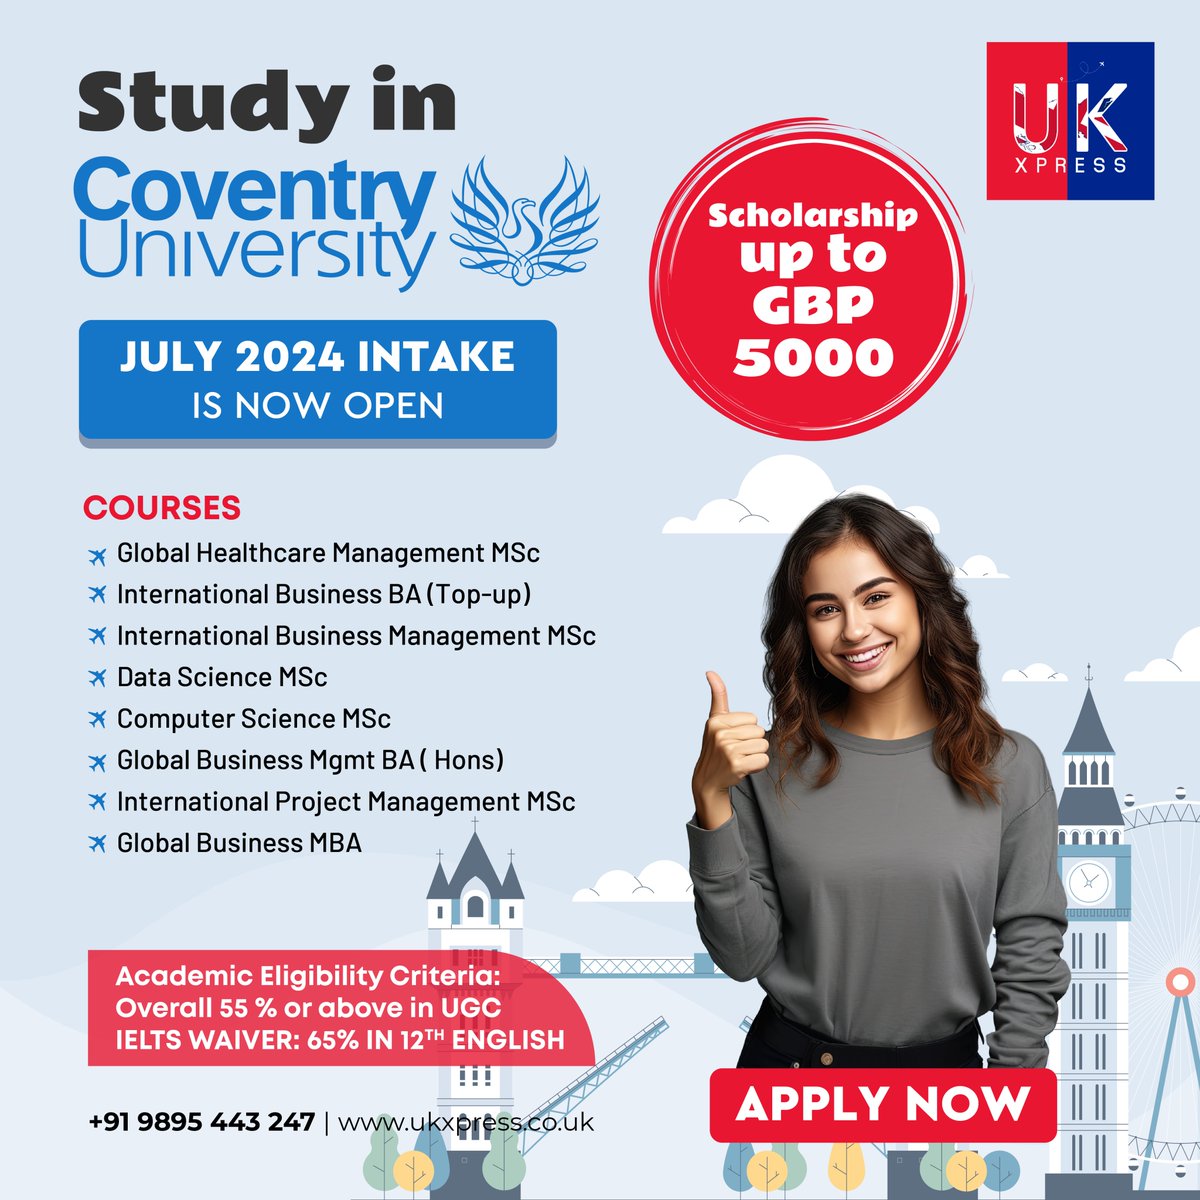 Explore exciting study opportunities at Coventry University! 

Contact us today to kick-start your journey towards studying abroad.
📞+91 9895443247

#ukeducation #ukadmissions  #abroadstudy #12thExamResult #10thresults #12thresult